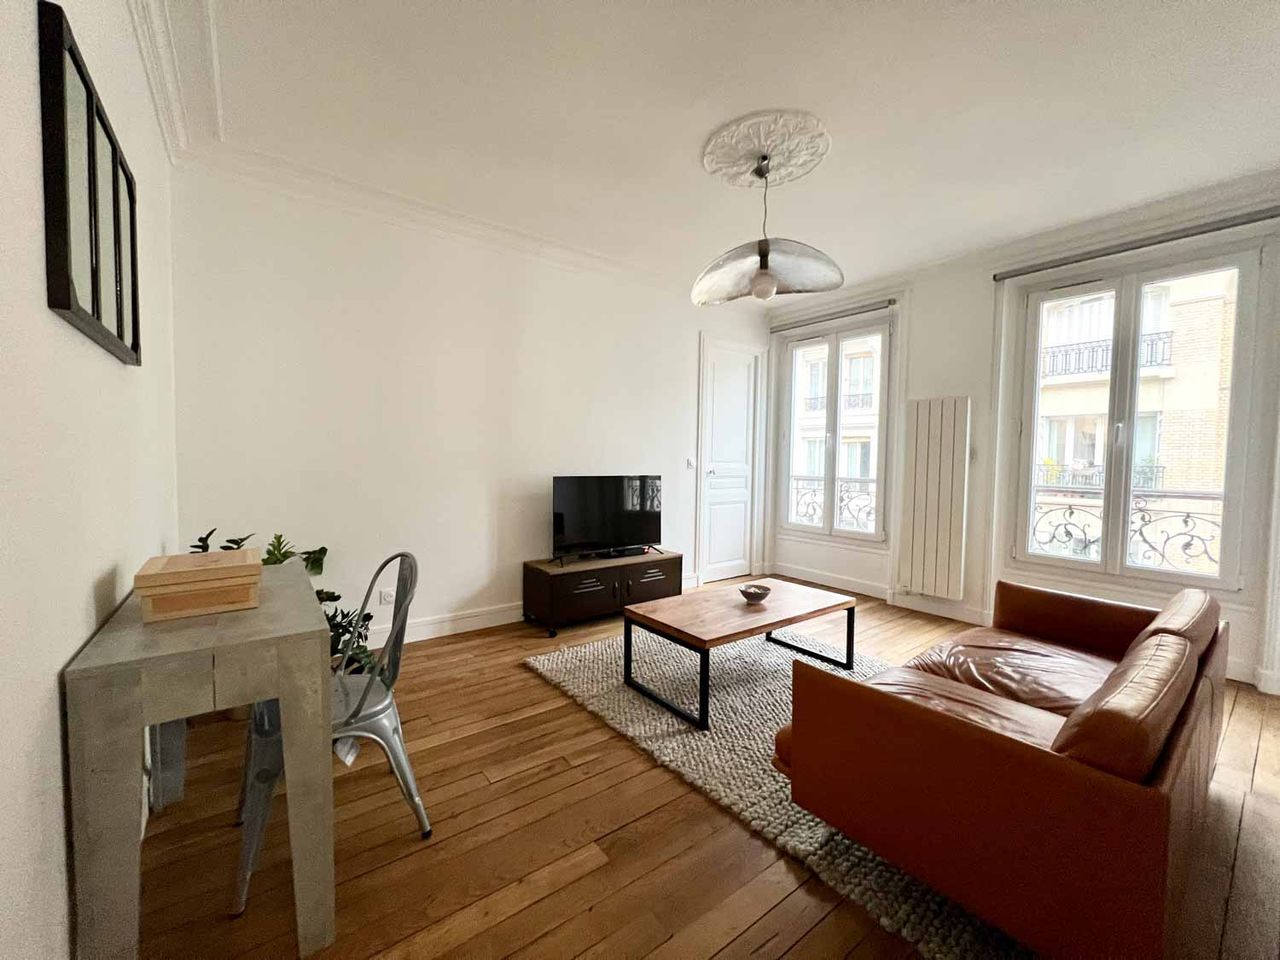 A Charming 3-Room Apartment in the Heart of the 11th Arrondissement - Newly Renovated with Style